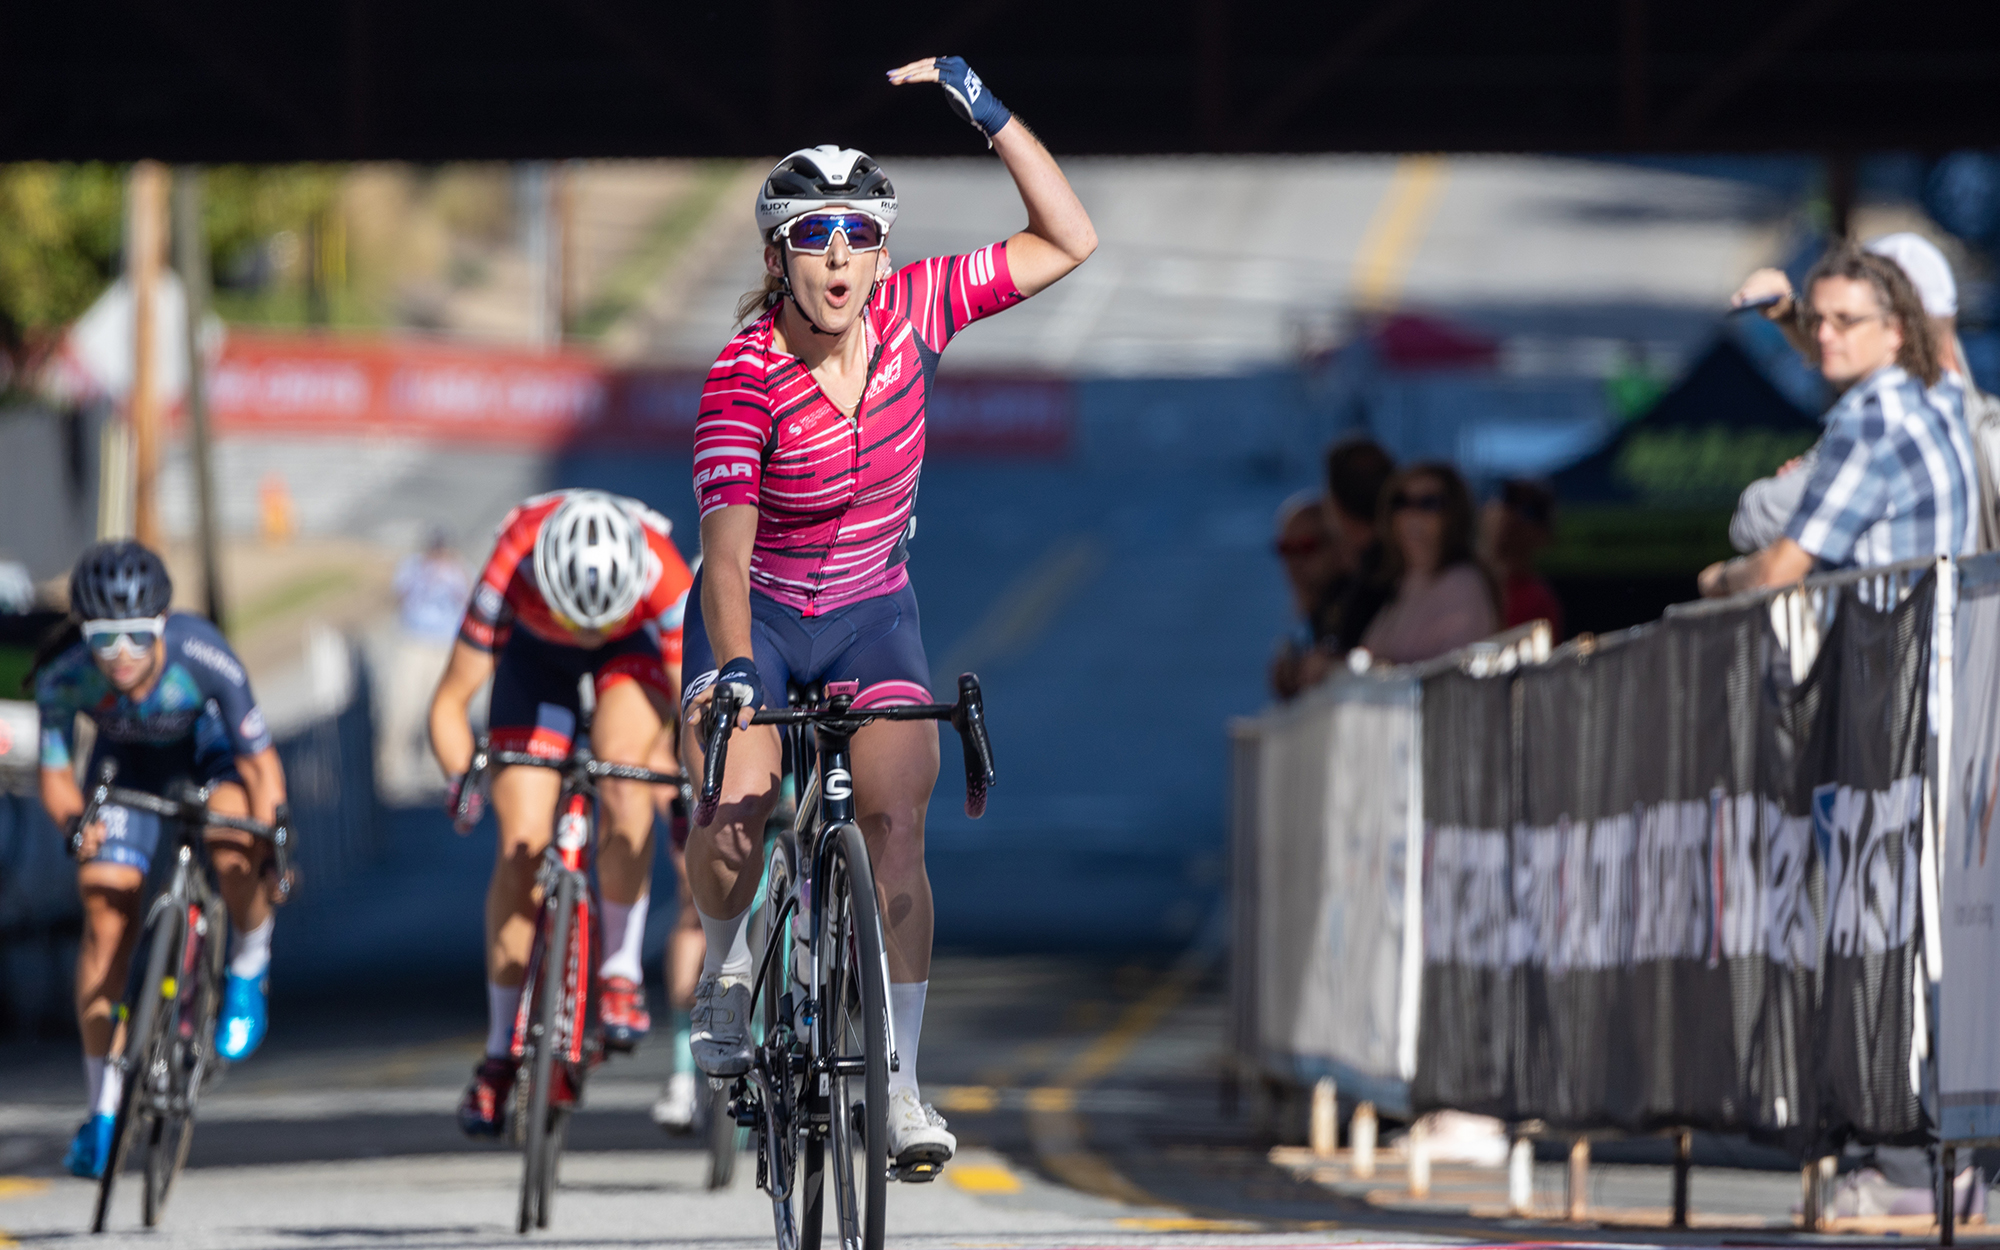 Maggie Coles-Lyster winning the second Winston-Salem Criterium at the 2021 Winston-Salem Cycling Classic. Photo Credit: Snowy Mountain Photography.